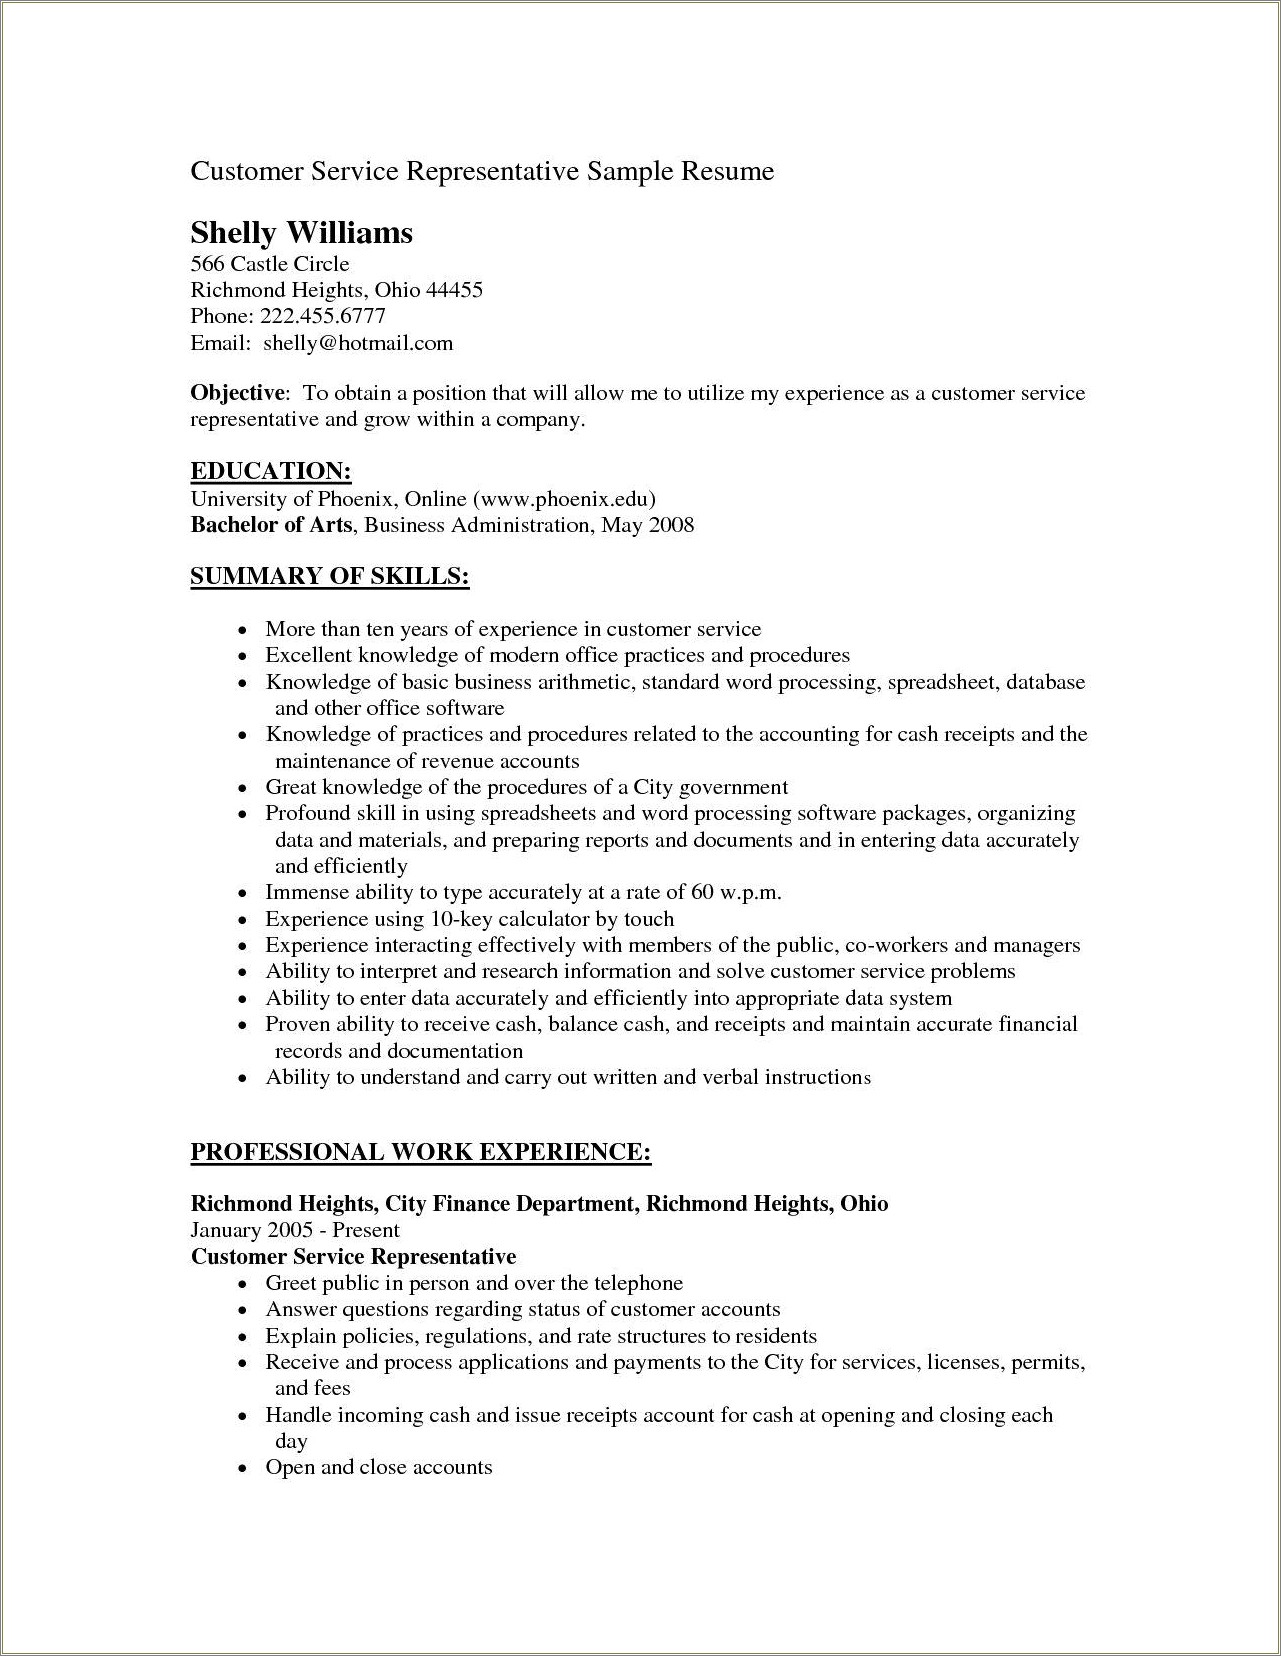 Customer Service Resume Profile Statement Examples